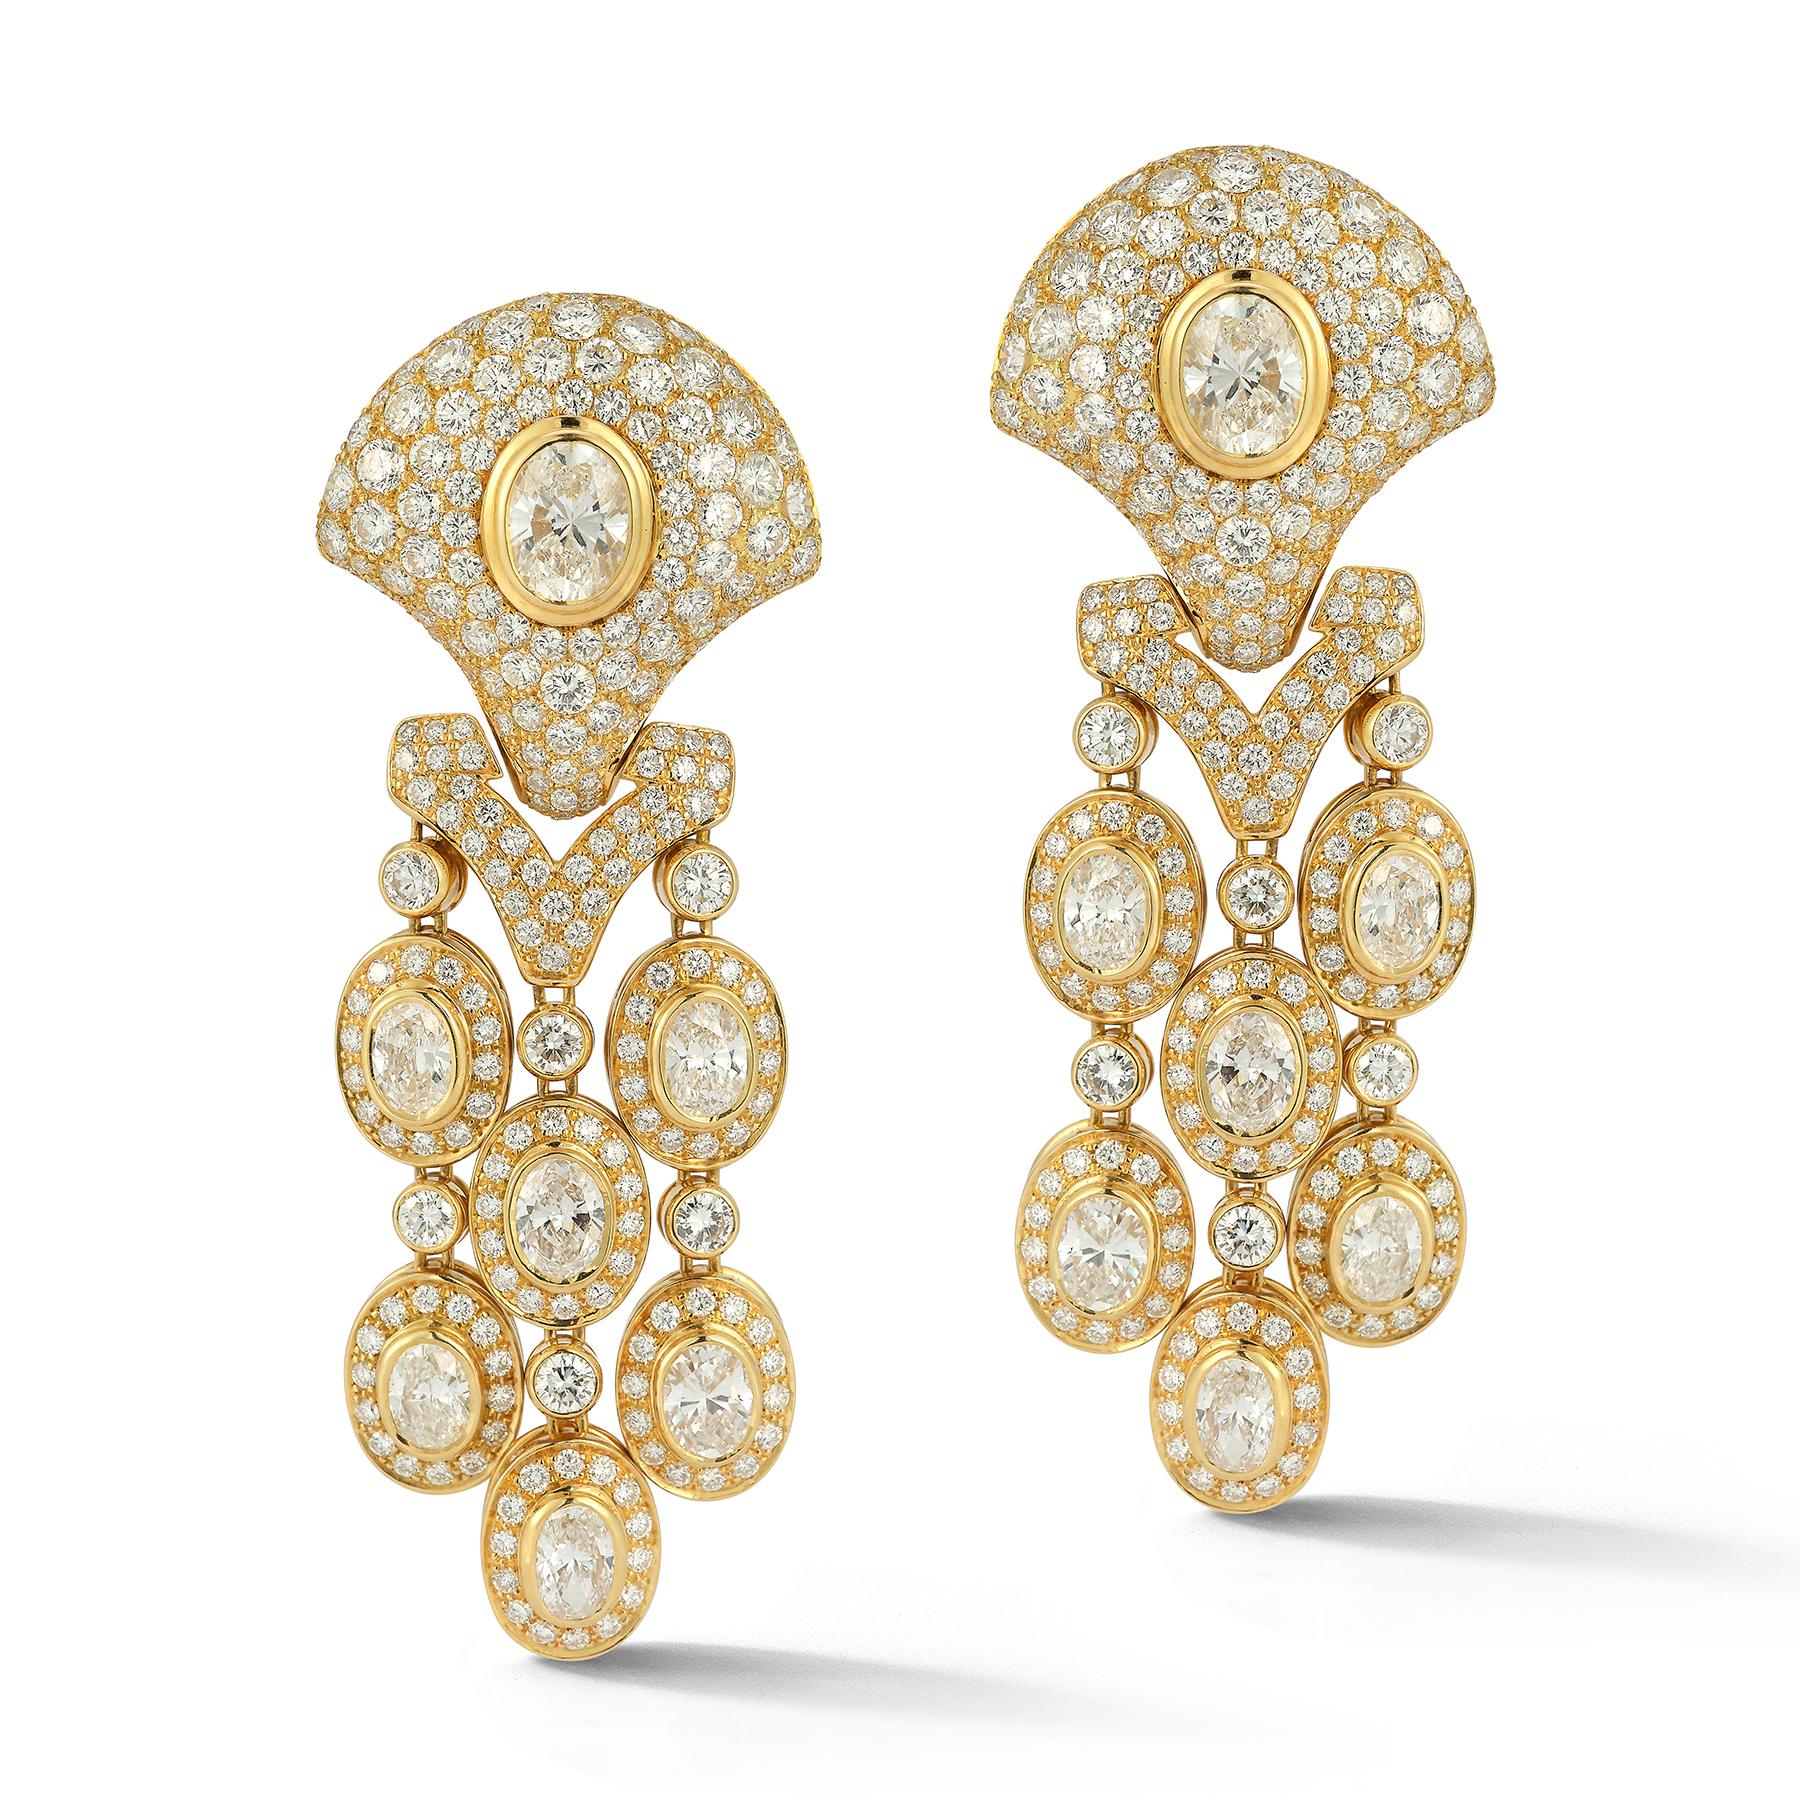 Diamond Chandelier  Earrings by Tabbah

Set Oval-shaped and round diamonds

 14 oval diamonds approximate weight of 7.50 carats, round for a total approximate weight of 10.00 carats. 
Total approximate weight of 17.50 carats

Measurements: 2.5